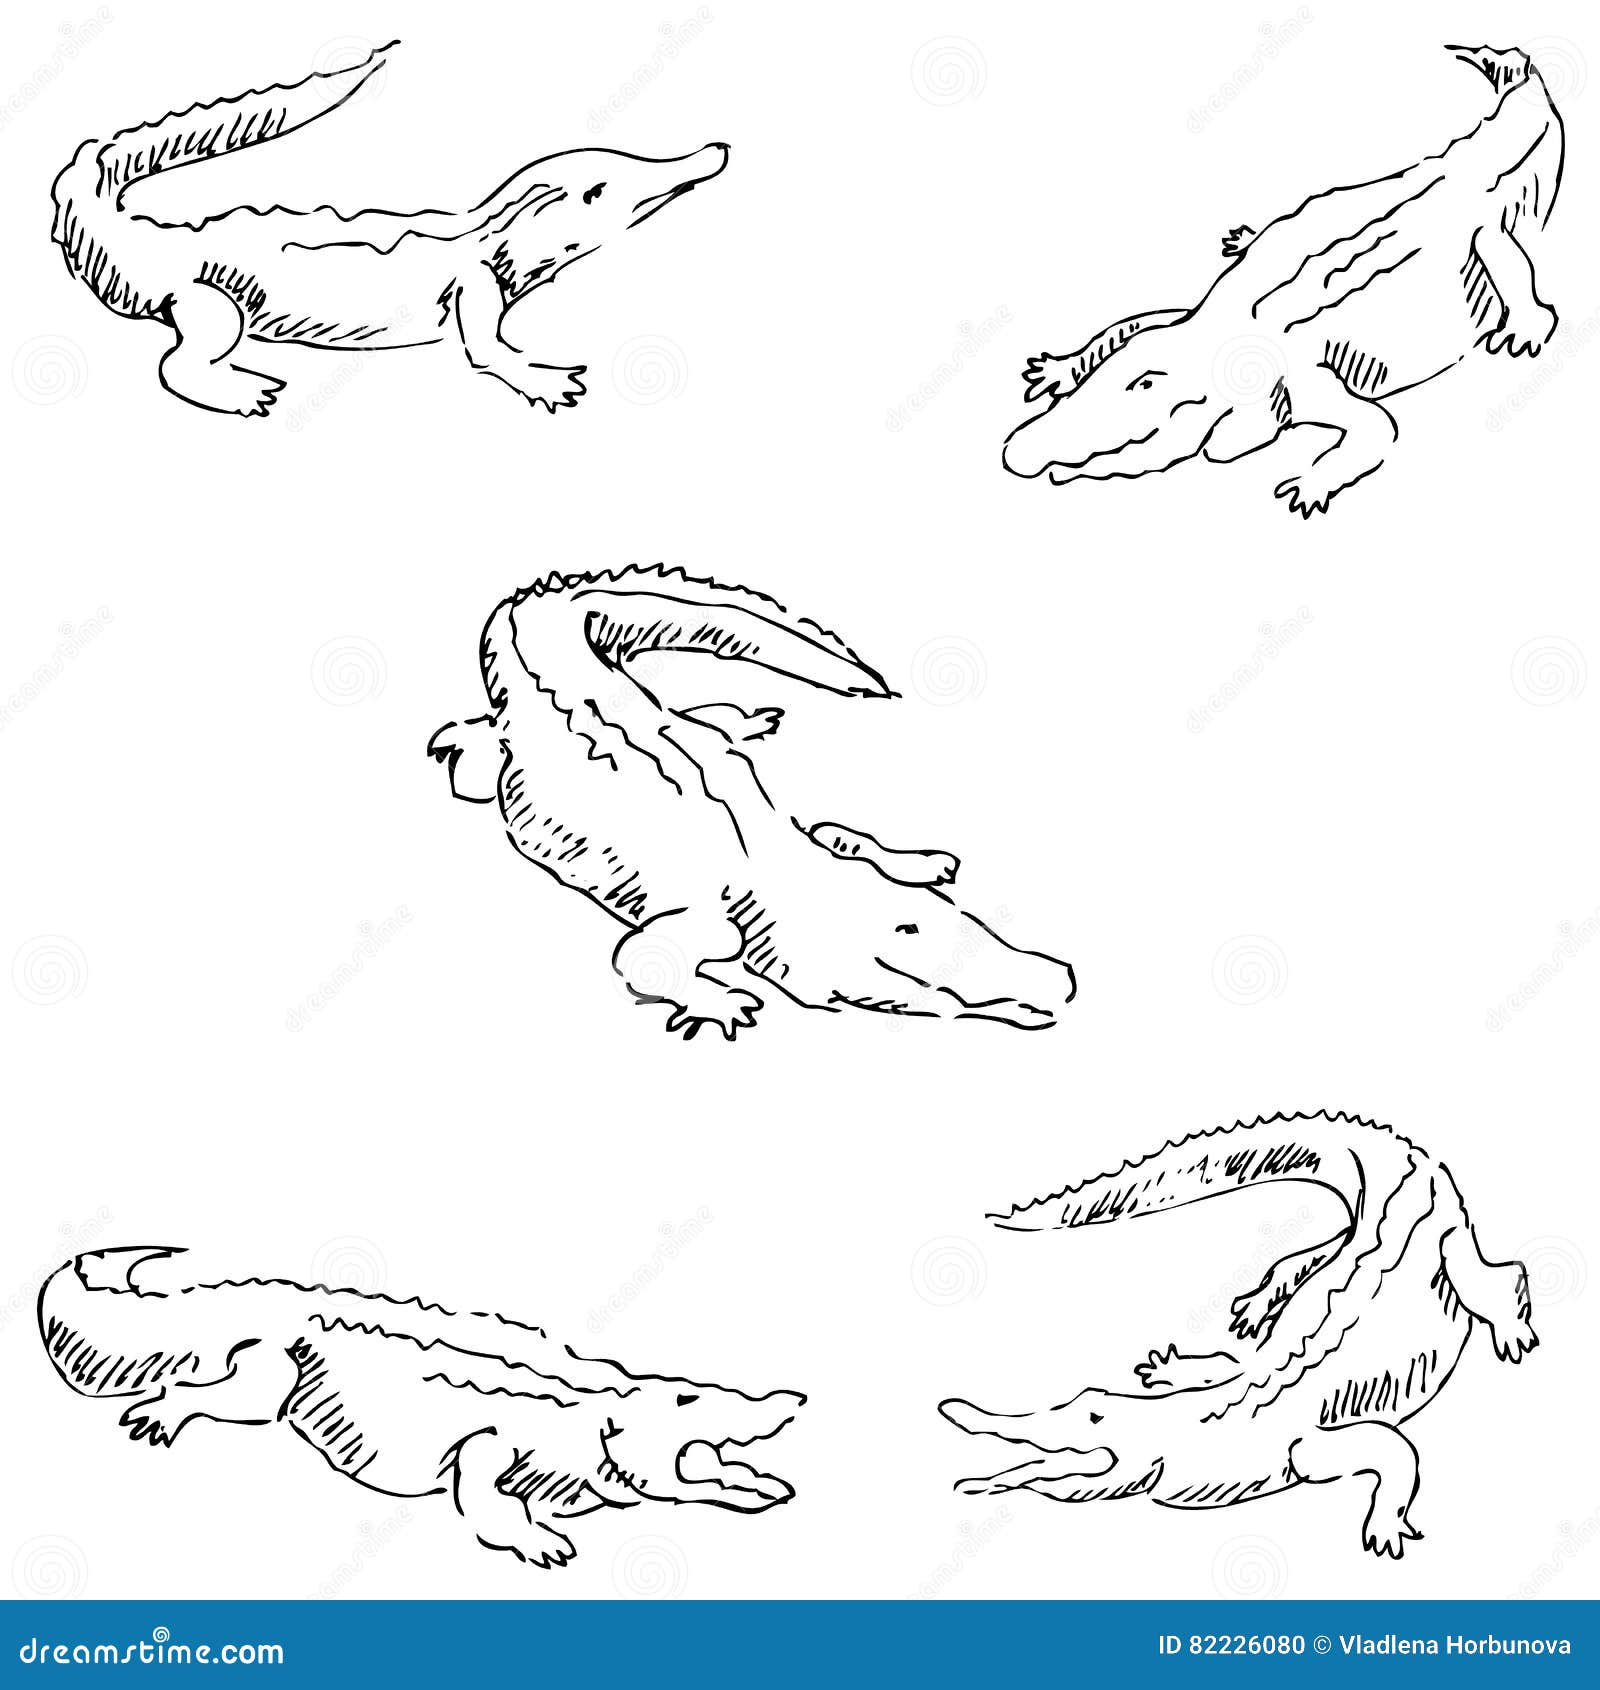 How to Draw a Crocodile with Pen and Ink